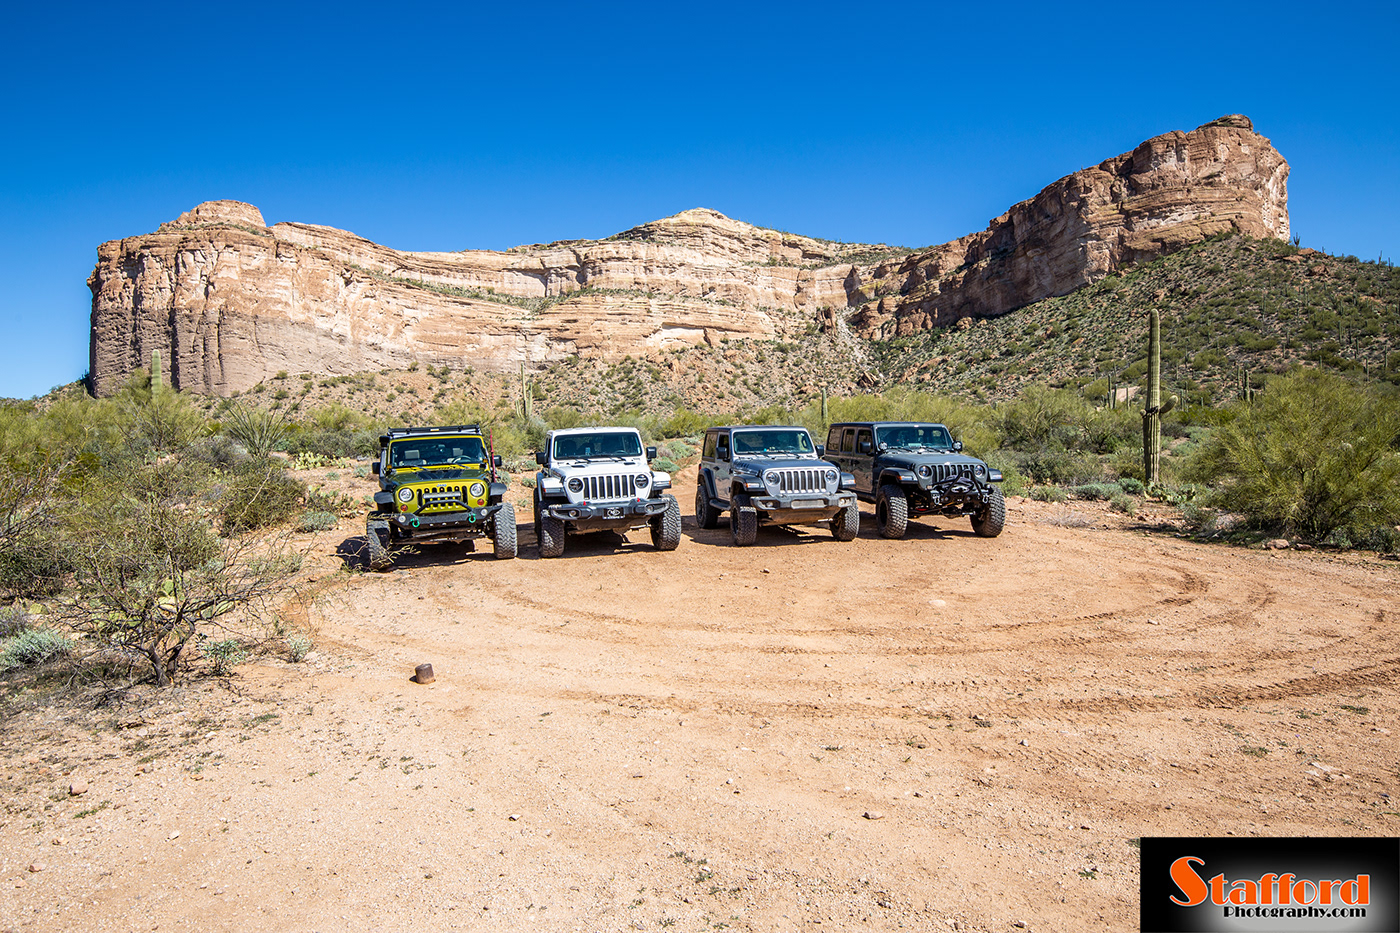 4WD 4x4 jeep Landscape Nature Offroad Photography  Wrangler